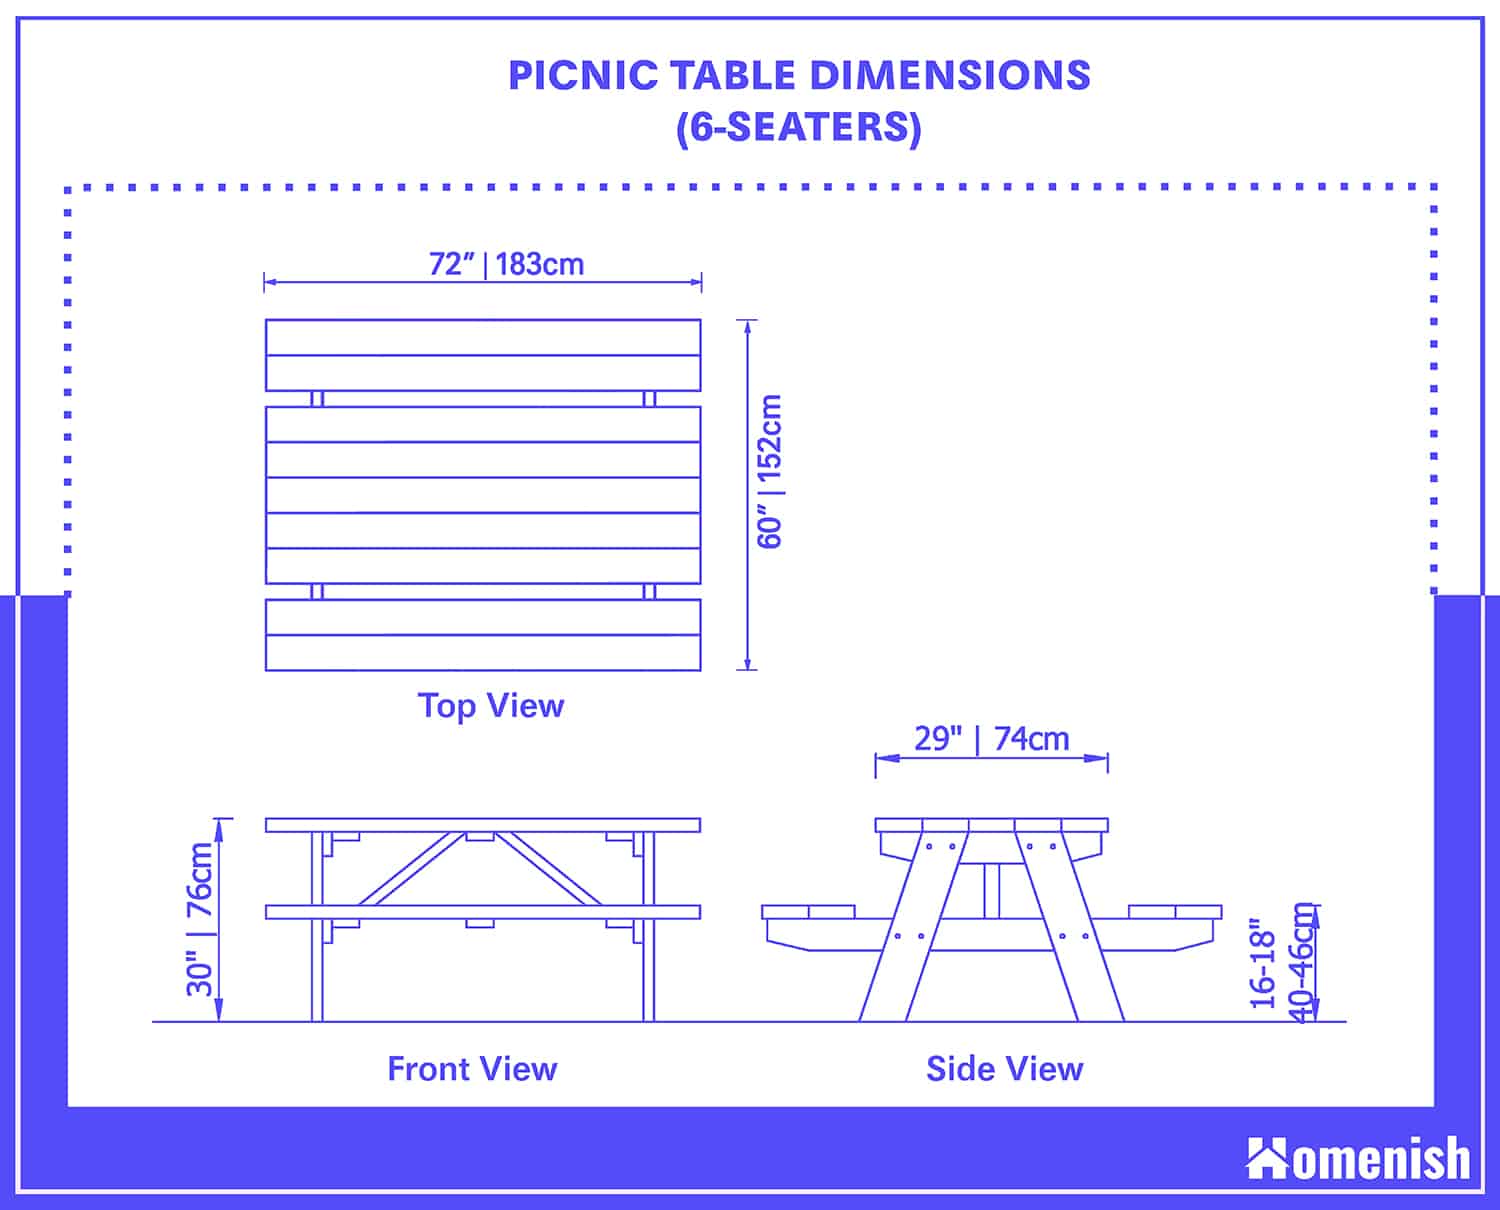 Standard Picnic Table Dimensions With, How Wide Is A Picnic Table Seat